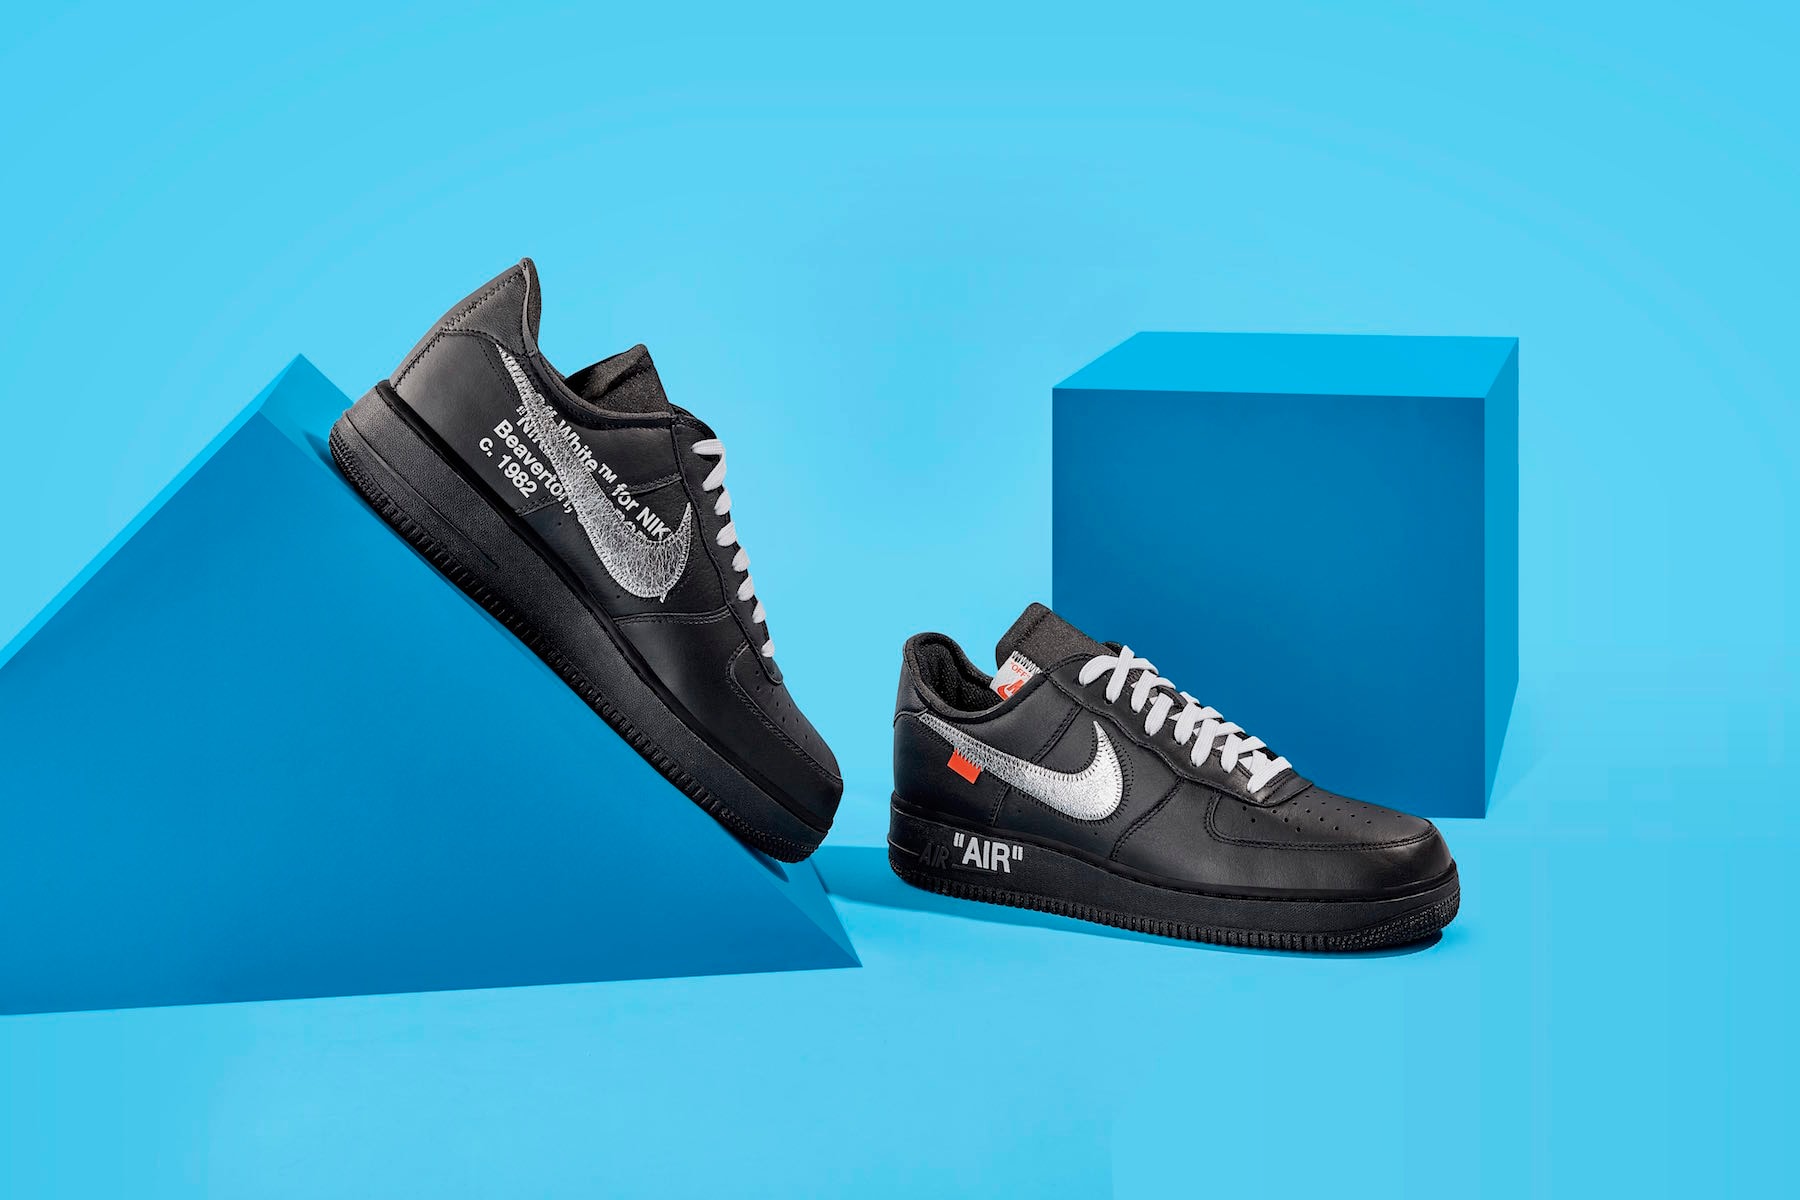 Virgil Abloh x Nike Air Force 1 for MoMA 聯名鞋款正式發佈